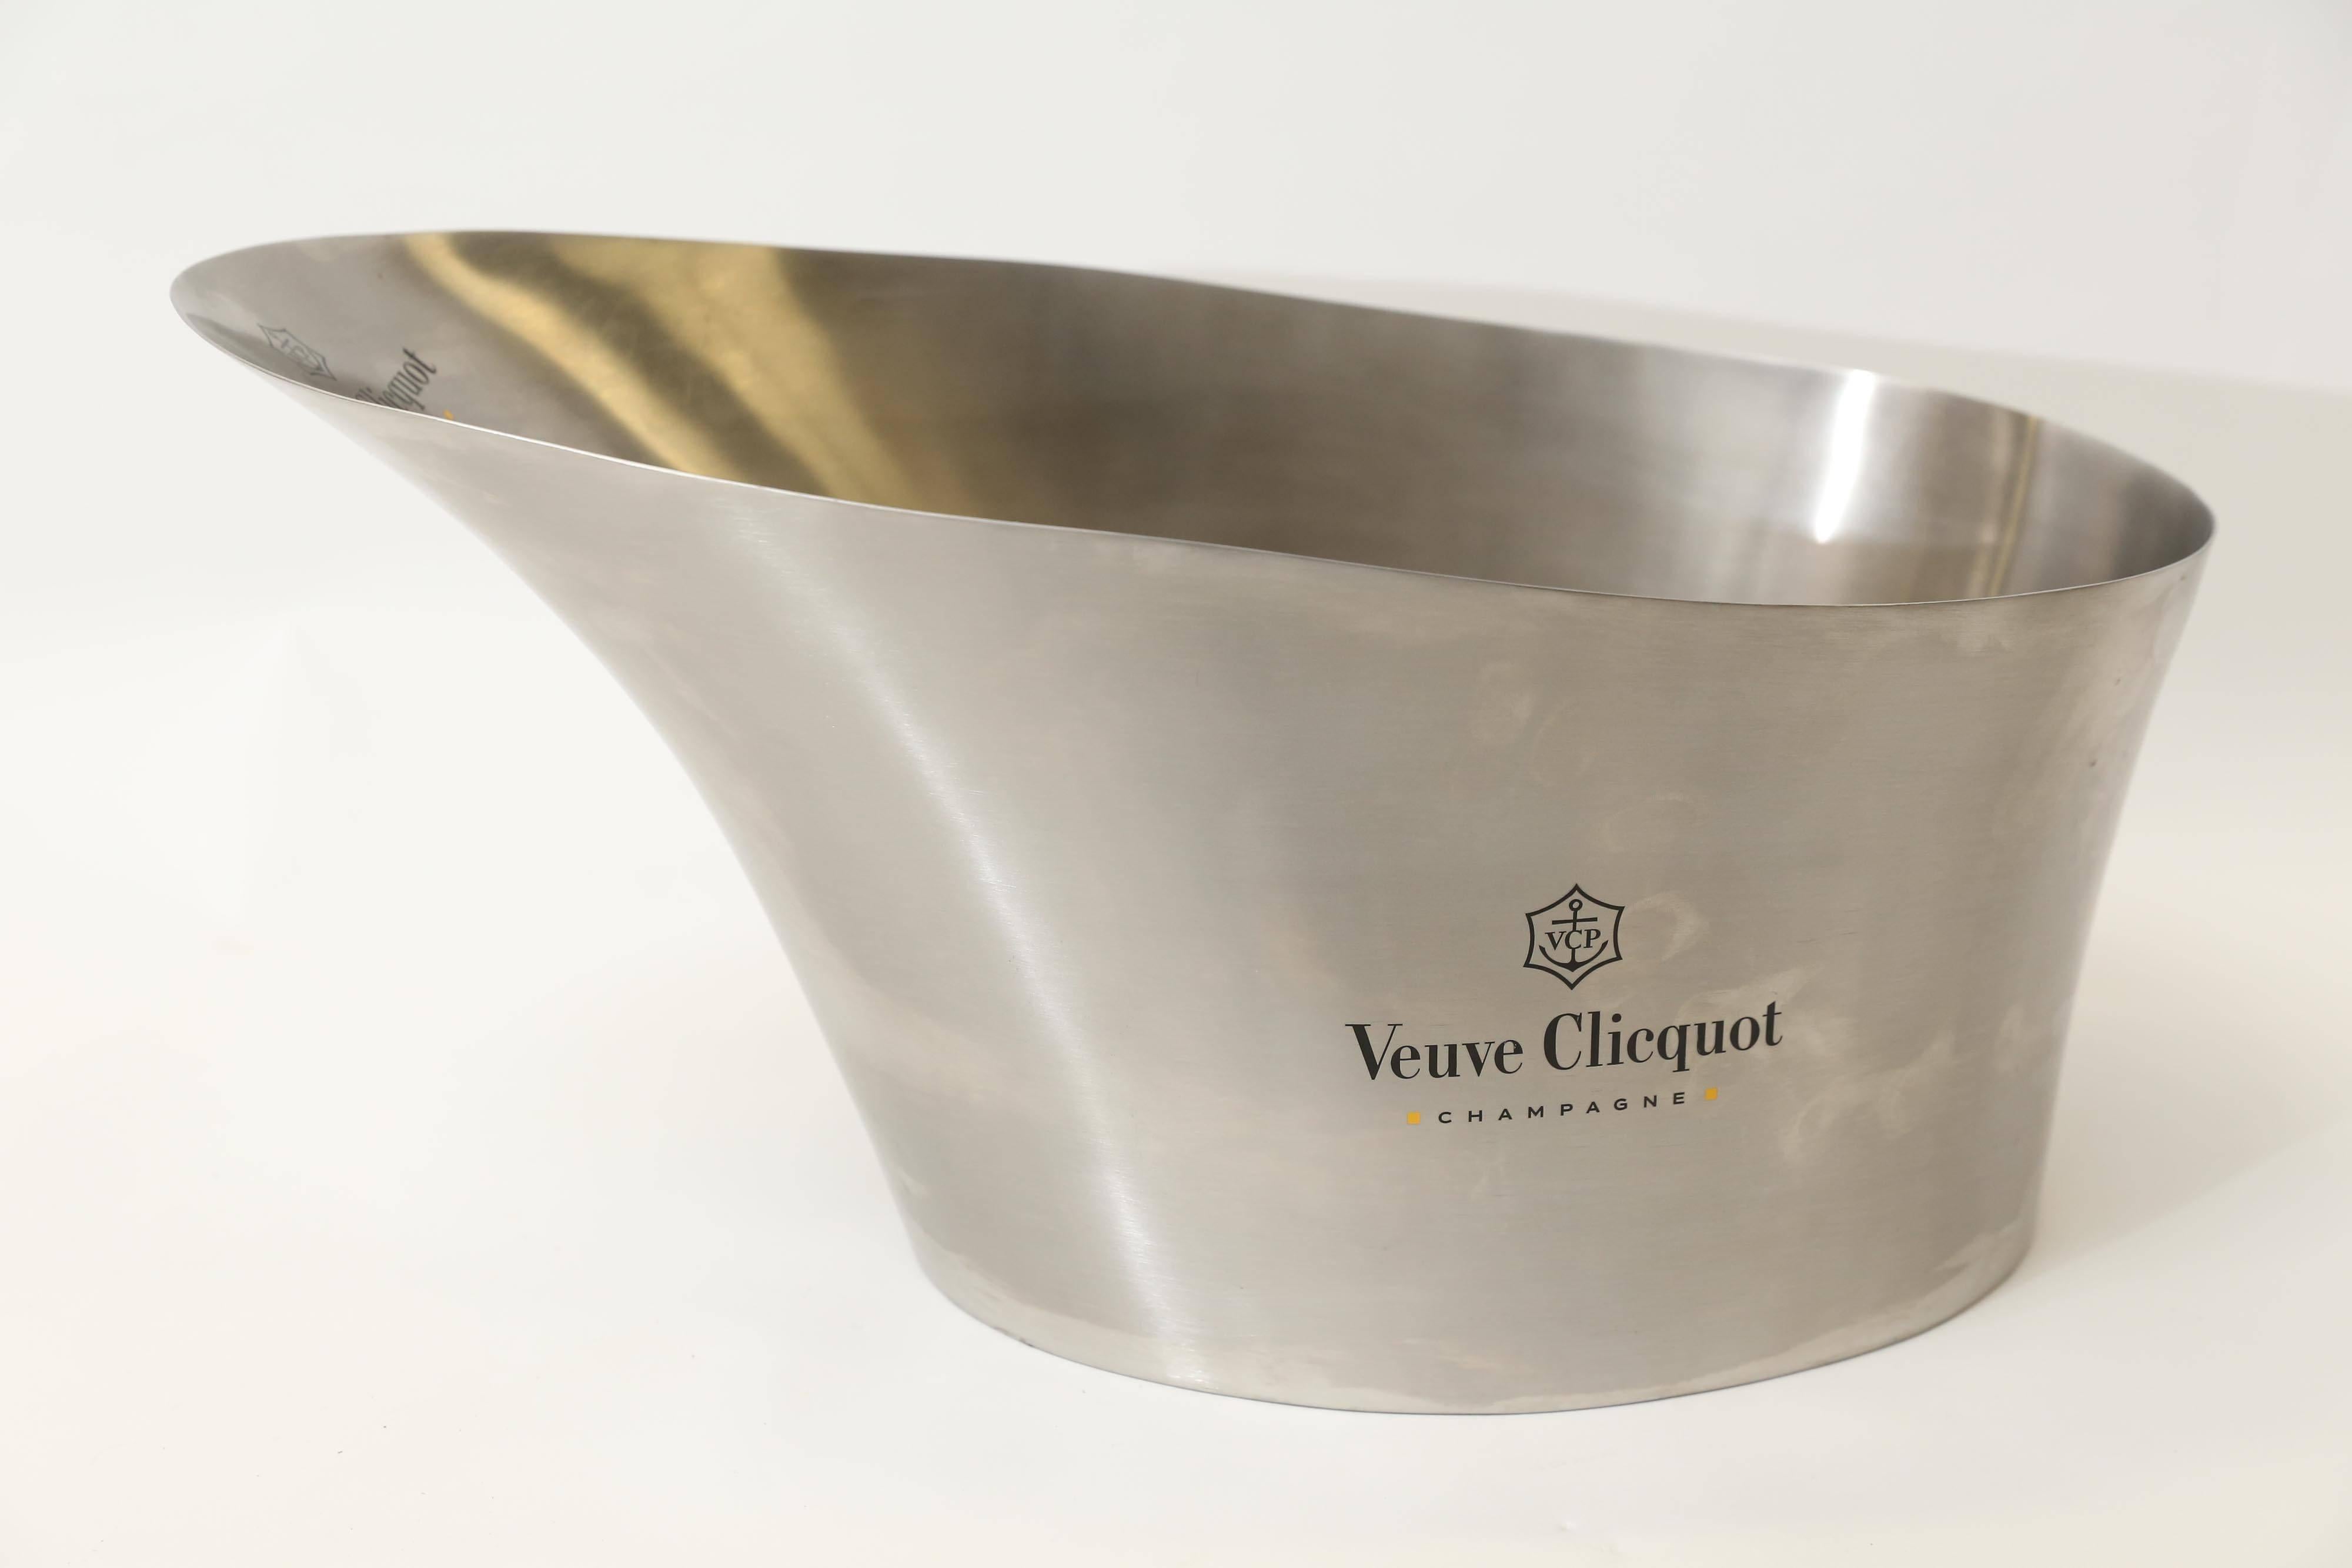 20th Century French Veuve Clicquot Double Champagne Cooler